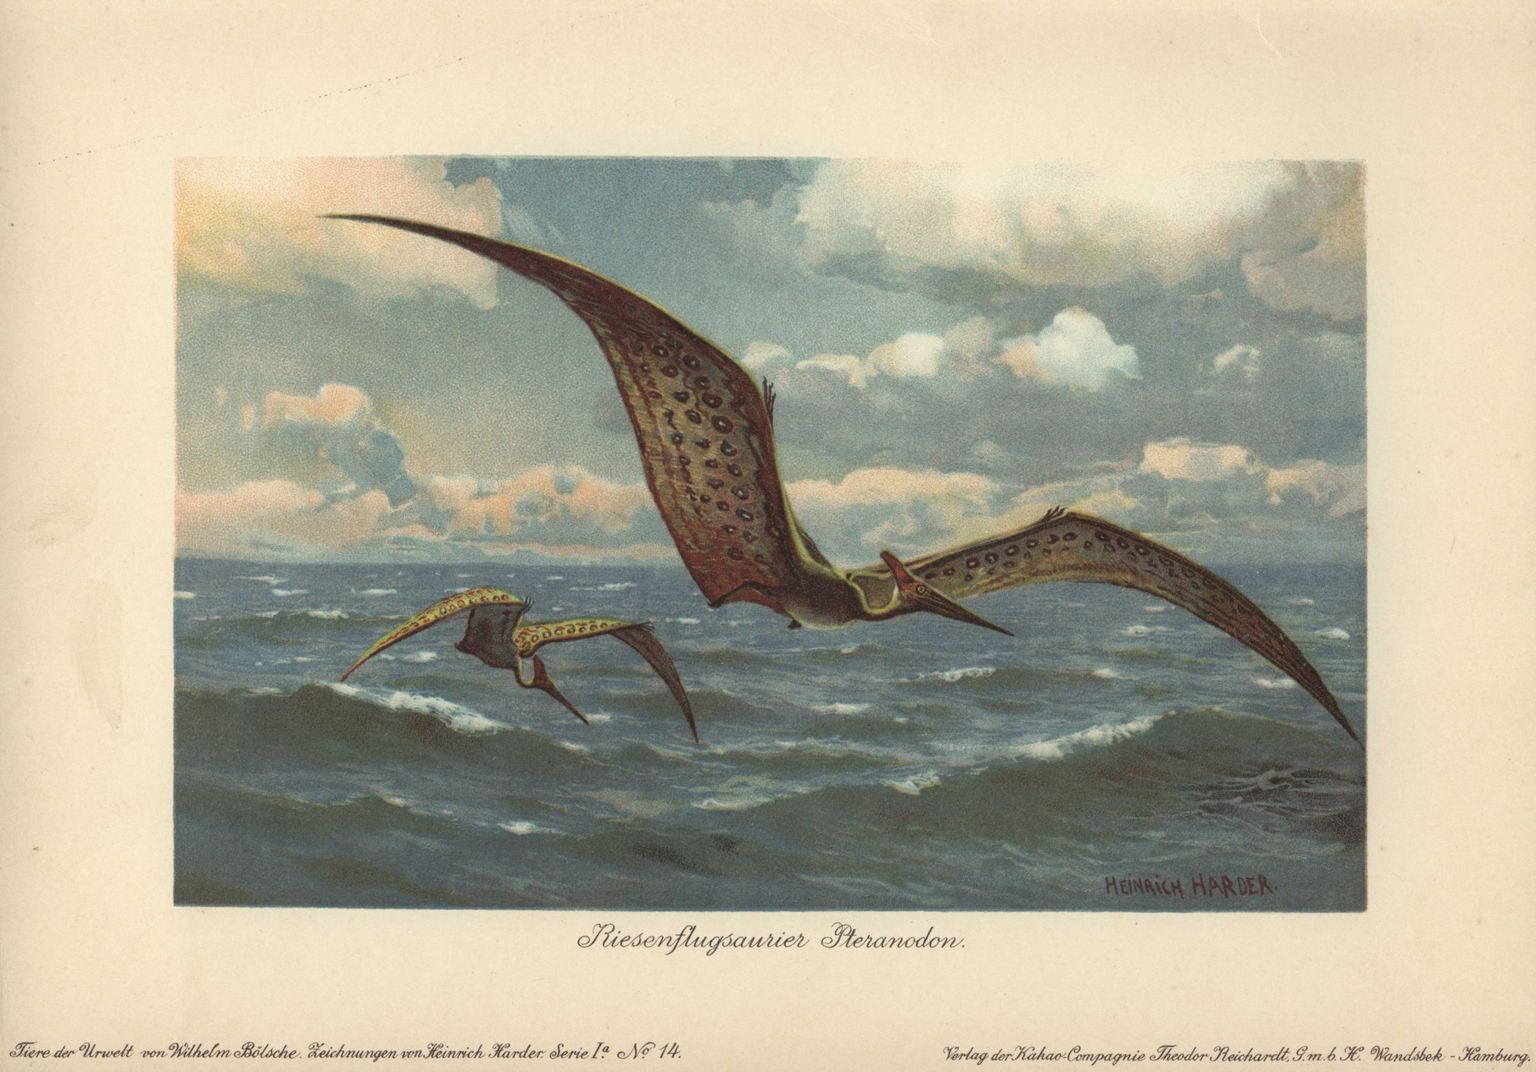 7JP-F1-0948-000620 (1804377)ORIGINAL:Pteranodon (from the Greek for 'wing' and 'toothless') were large flying pterosaurs from the Late Cretaceous period with a wingspan of up to nine meters. ||Colour printed illustration by Heinrich Harder from 'Tiere der Urwelt' Animals of the Prehistoric World, 1916, Hamburg. Heinrich Harder (1858-1935) was a German landscape artist and book illustrator. From a series of prehistoric creature cards published by the Reichardt Cocoa company. Natural historian Wilhelm Bolsche wrote the descriptive text.|